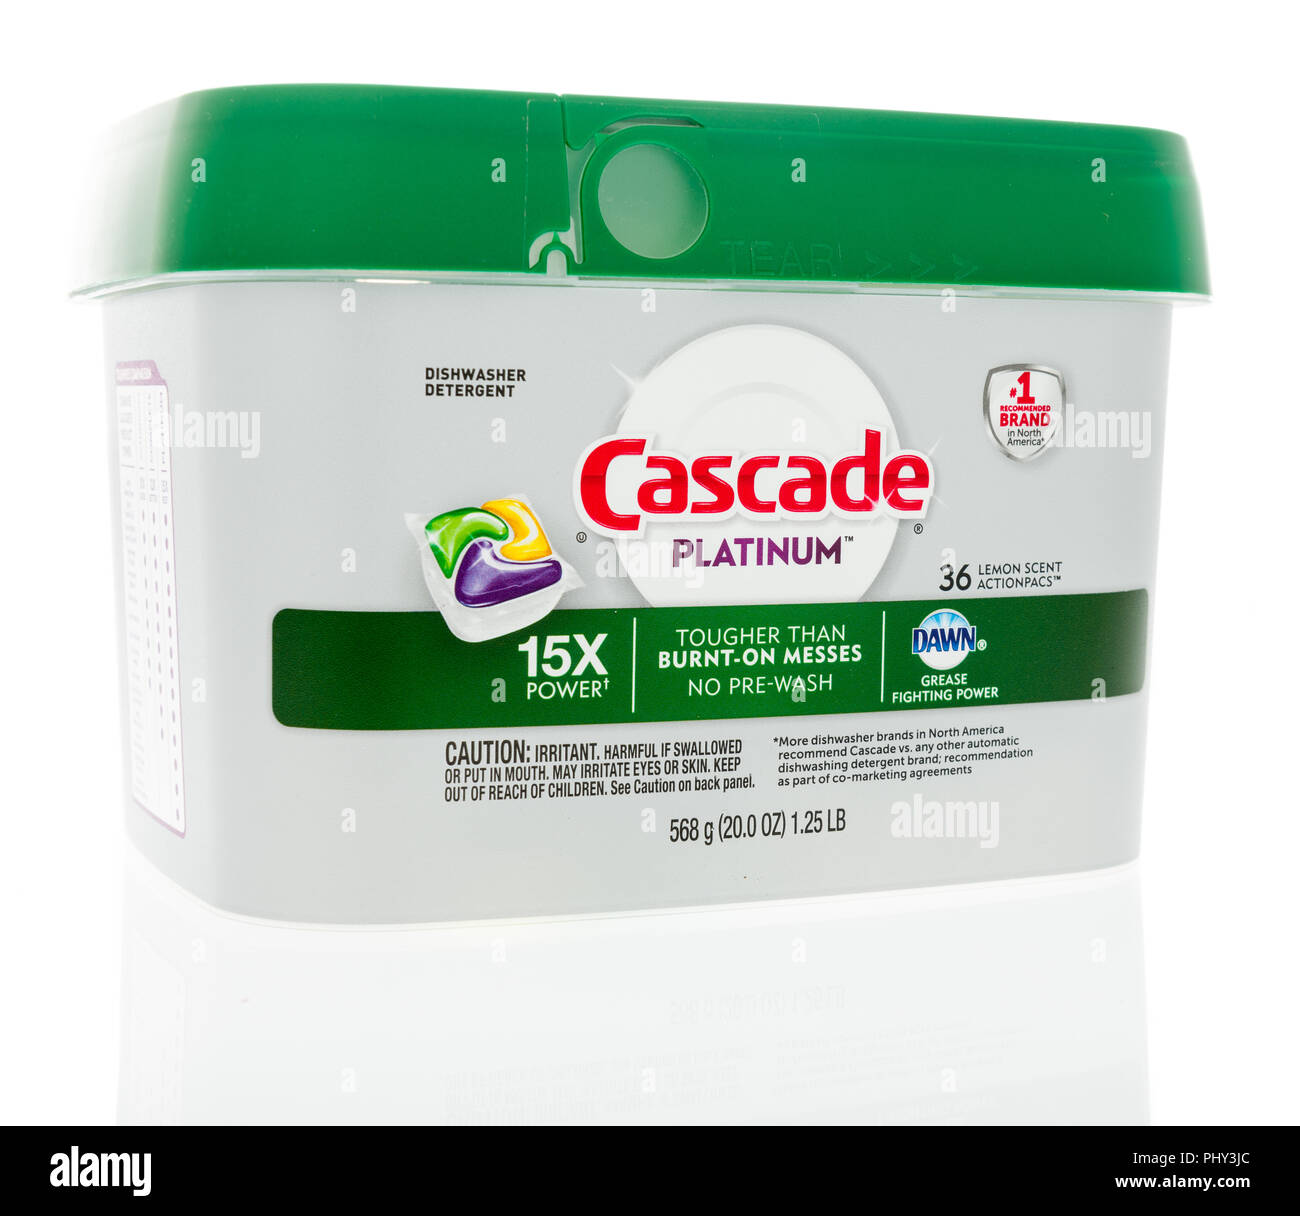 Winneconne, WI - 2 September 2018: A package of Cascade Platinum dishwasher detergent with Dawn grease fighting power on an isolated background Stock Photo